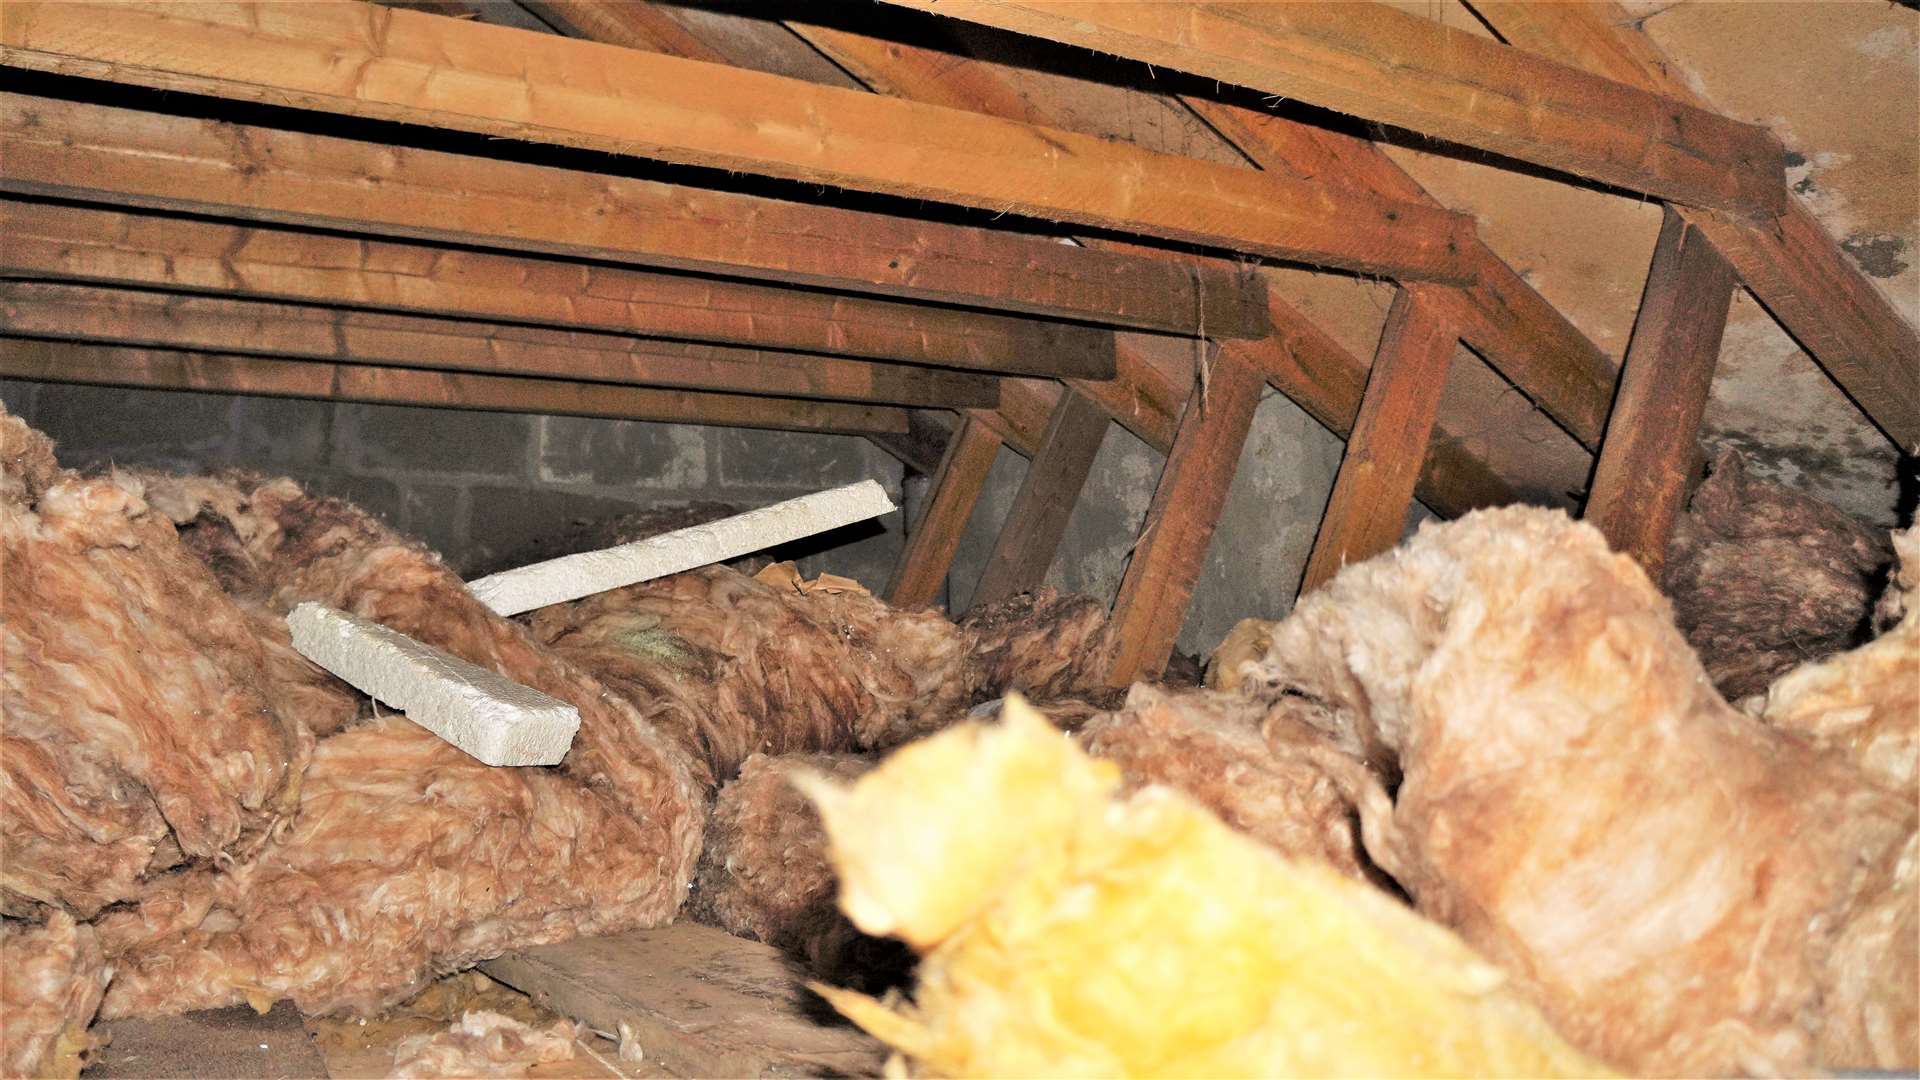 Insulation material in David Lightfoot's loft space that he says is 'thrown up' and not helping maintain optimum heat in the property.